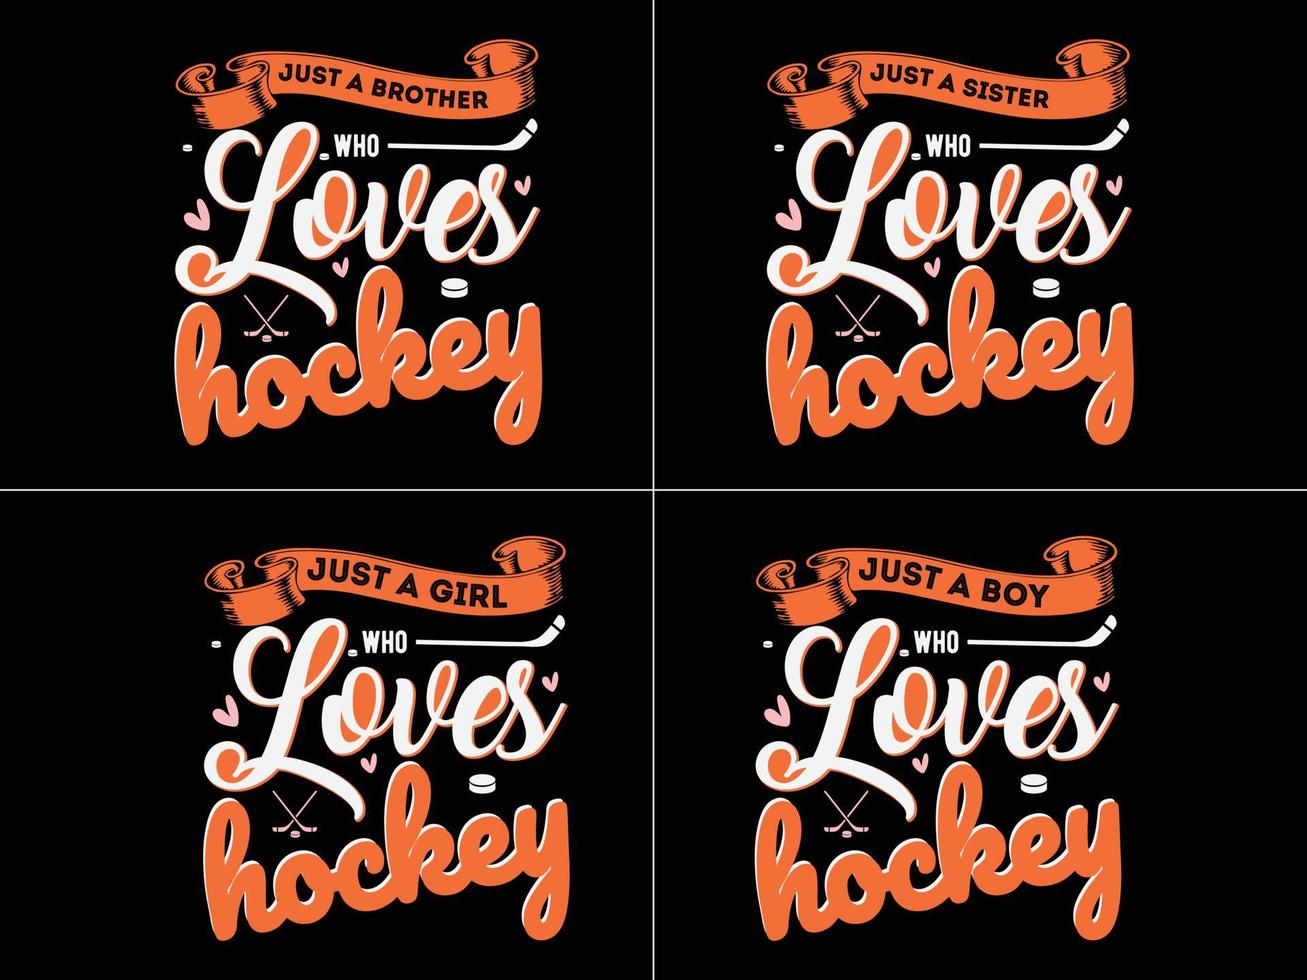 Just a boy girl brother sister who loves hockey t shirt design vector